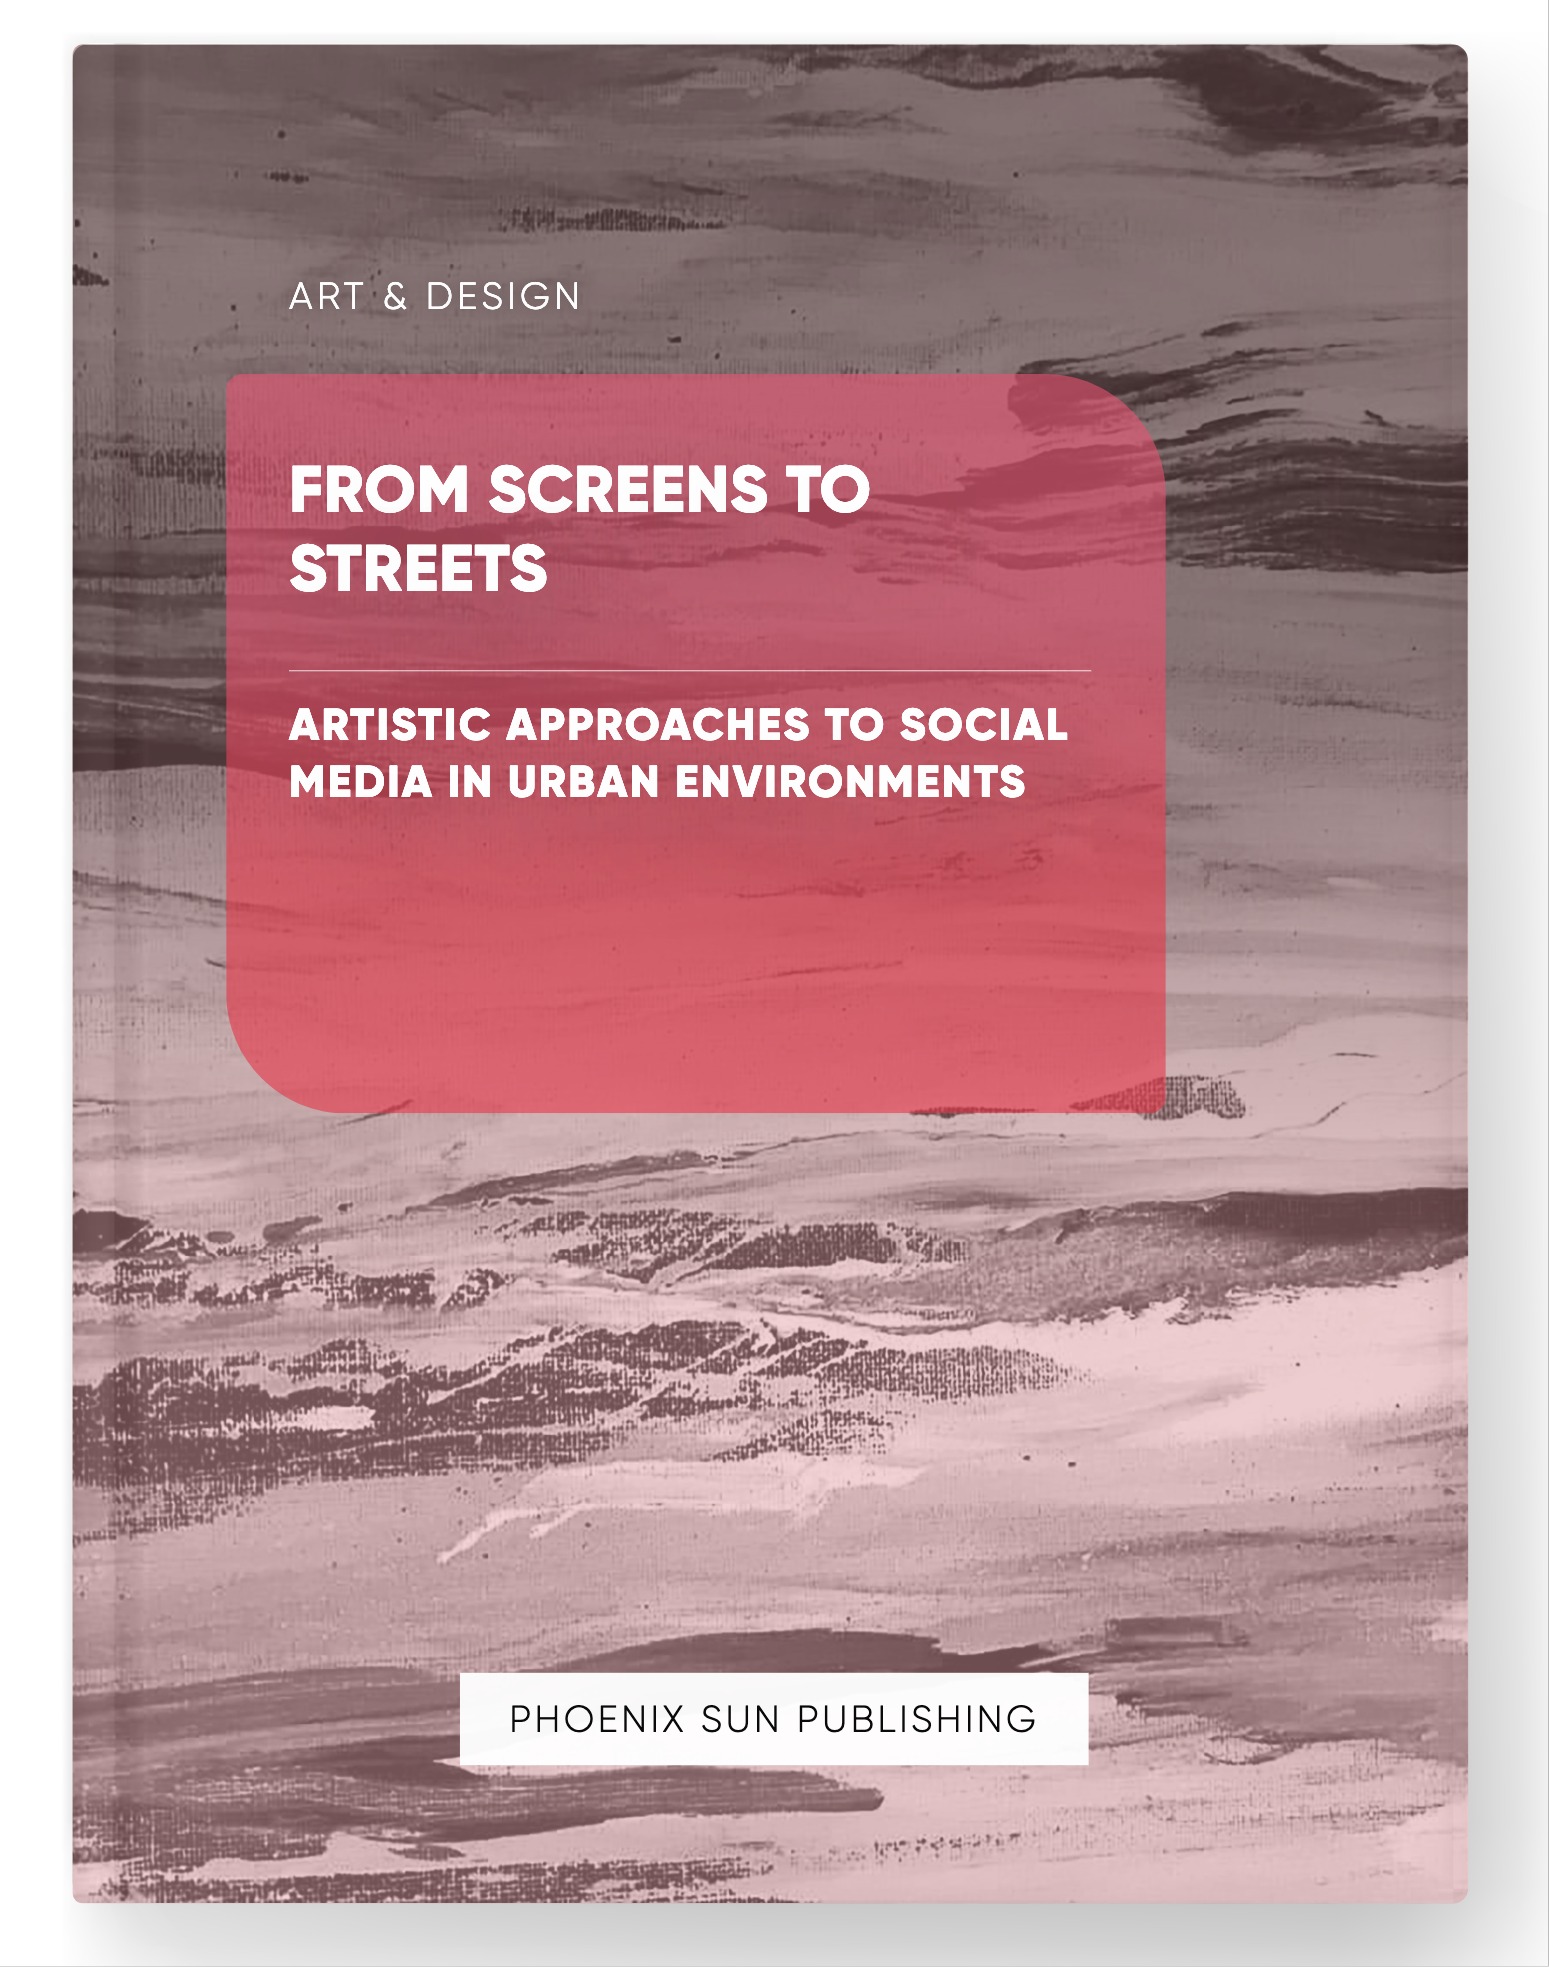 From Screens to Streets – Artistic Approaches to Social Media in Urban Environments